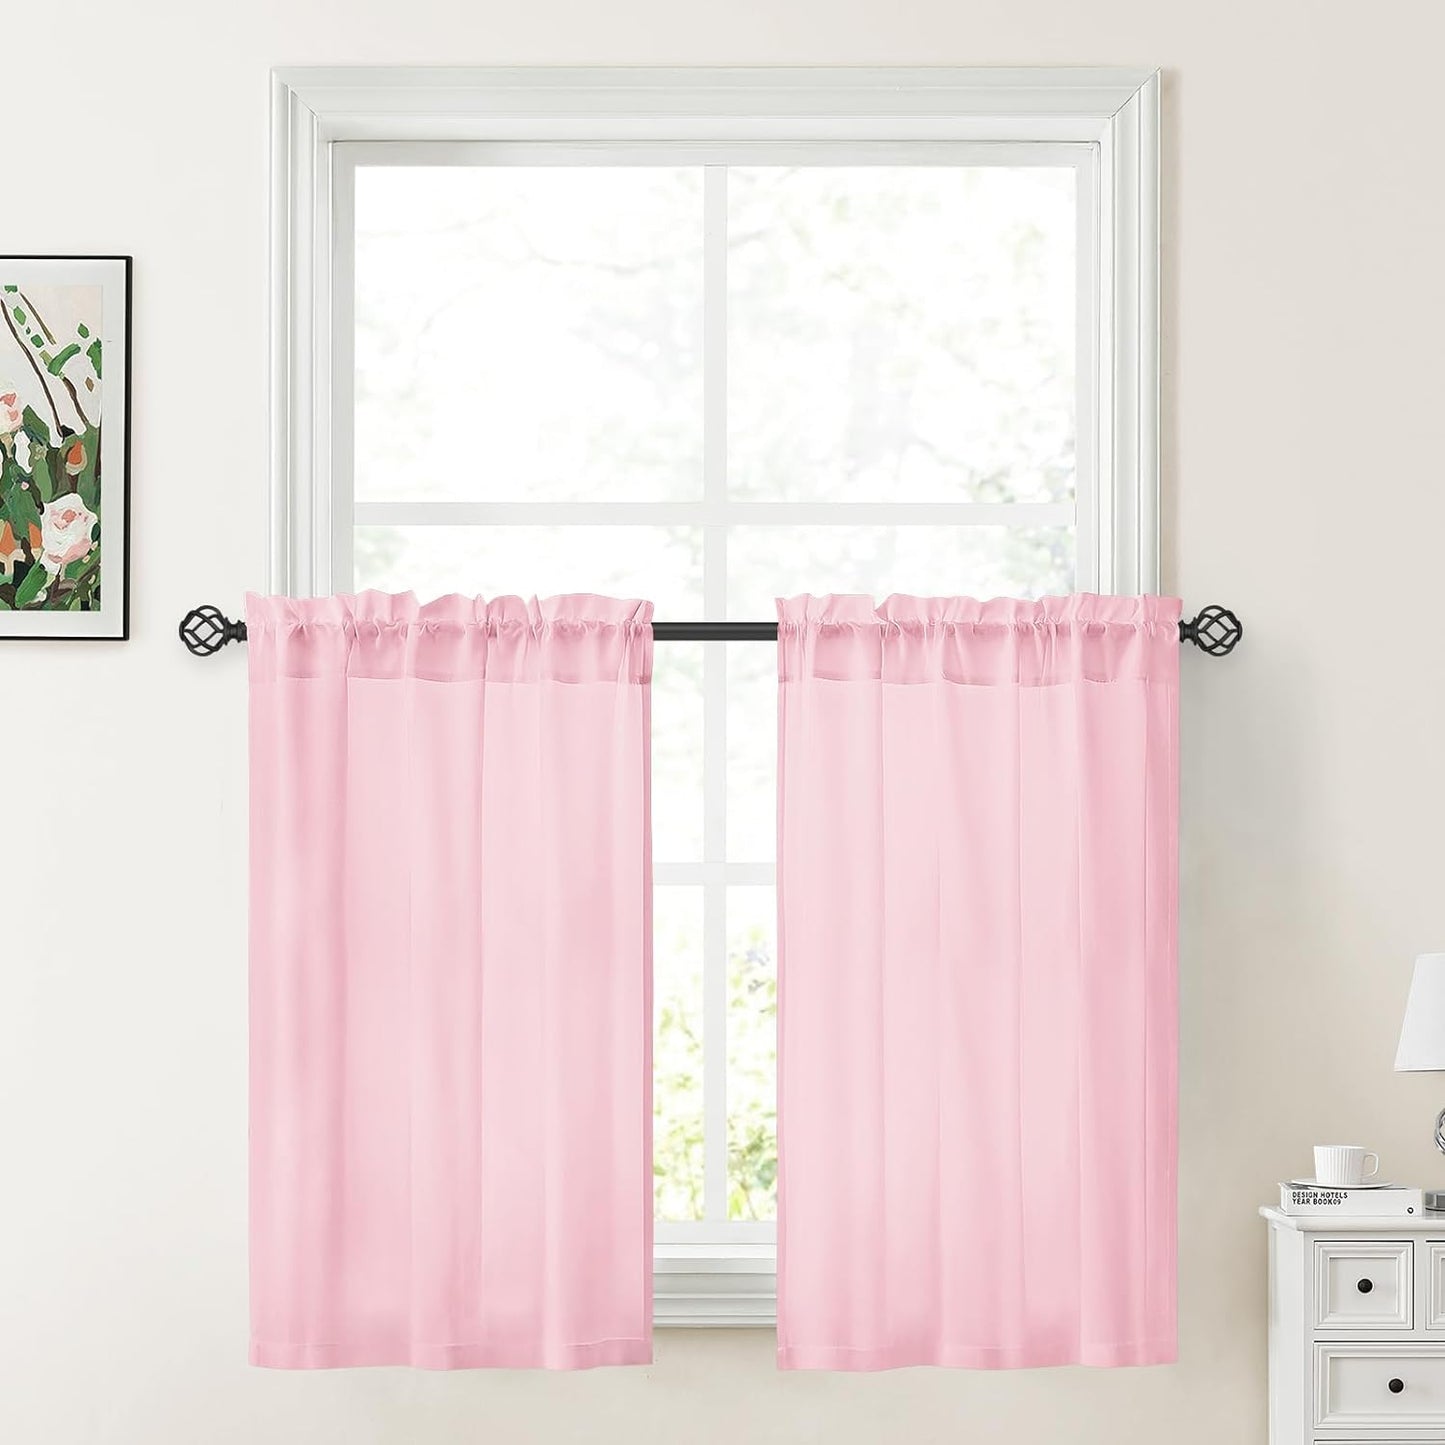 HOMEIDEAS Non-See-Through White Privacy Sheer Curtains 52 X 84 Inches Long 2 Panels Semi Sheer Curtains Light Filtering Window Curtains Drapes for Bedroom Living Room  HOMEIDEAS Light Pink W30" X L36" 